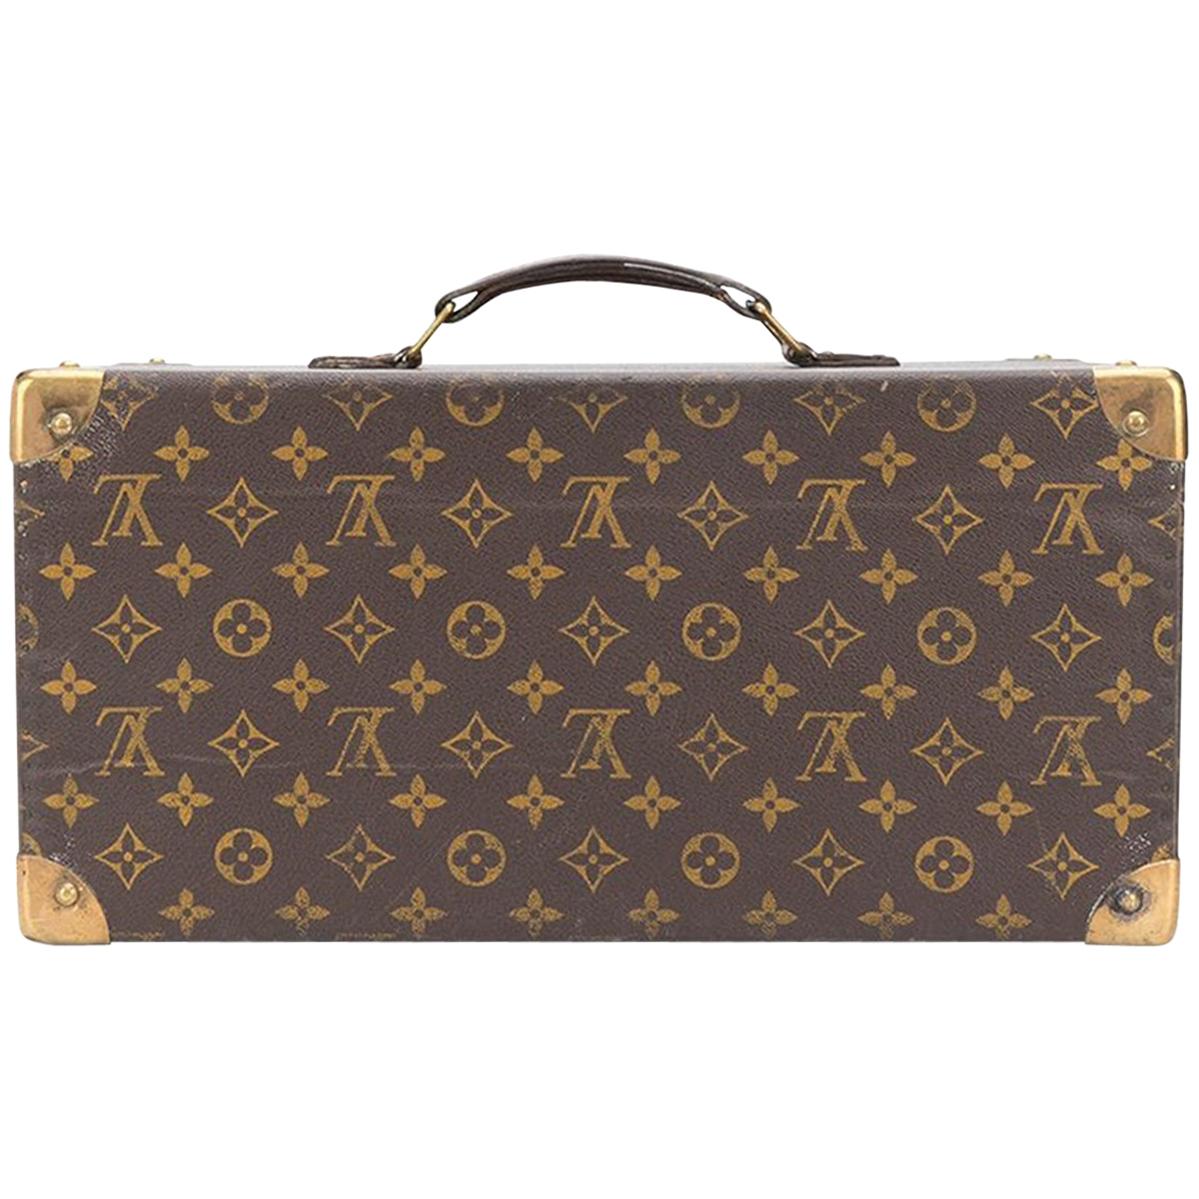 LOUIS VUITTON Brown LV Nylon Luggage Cover with Storage Case, Fits 65cm  (26”)